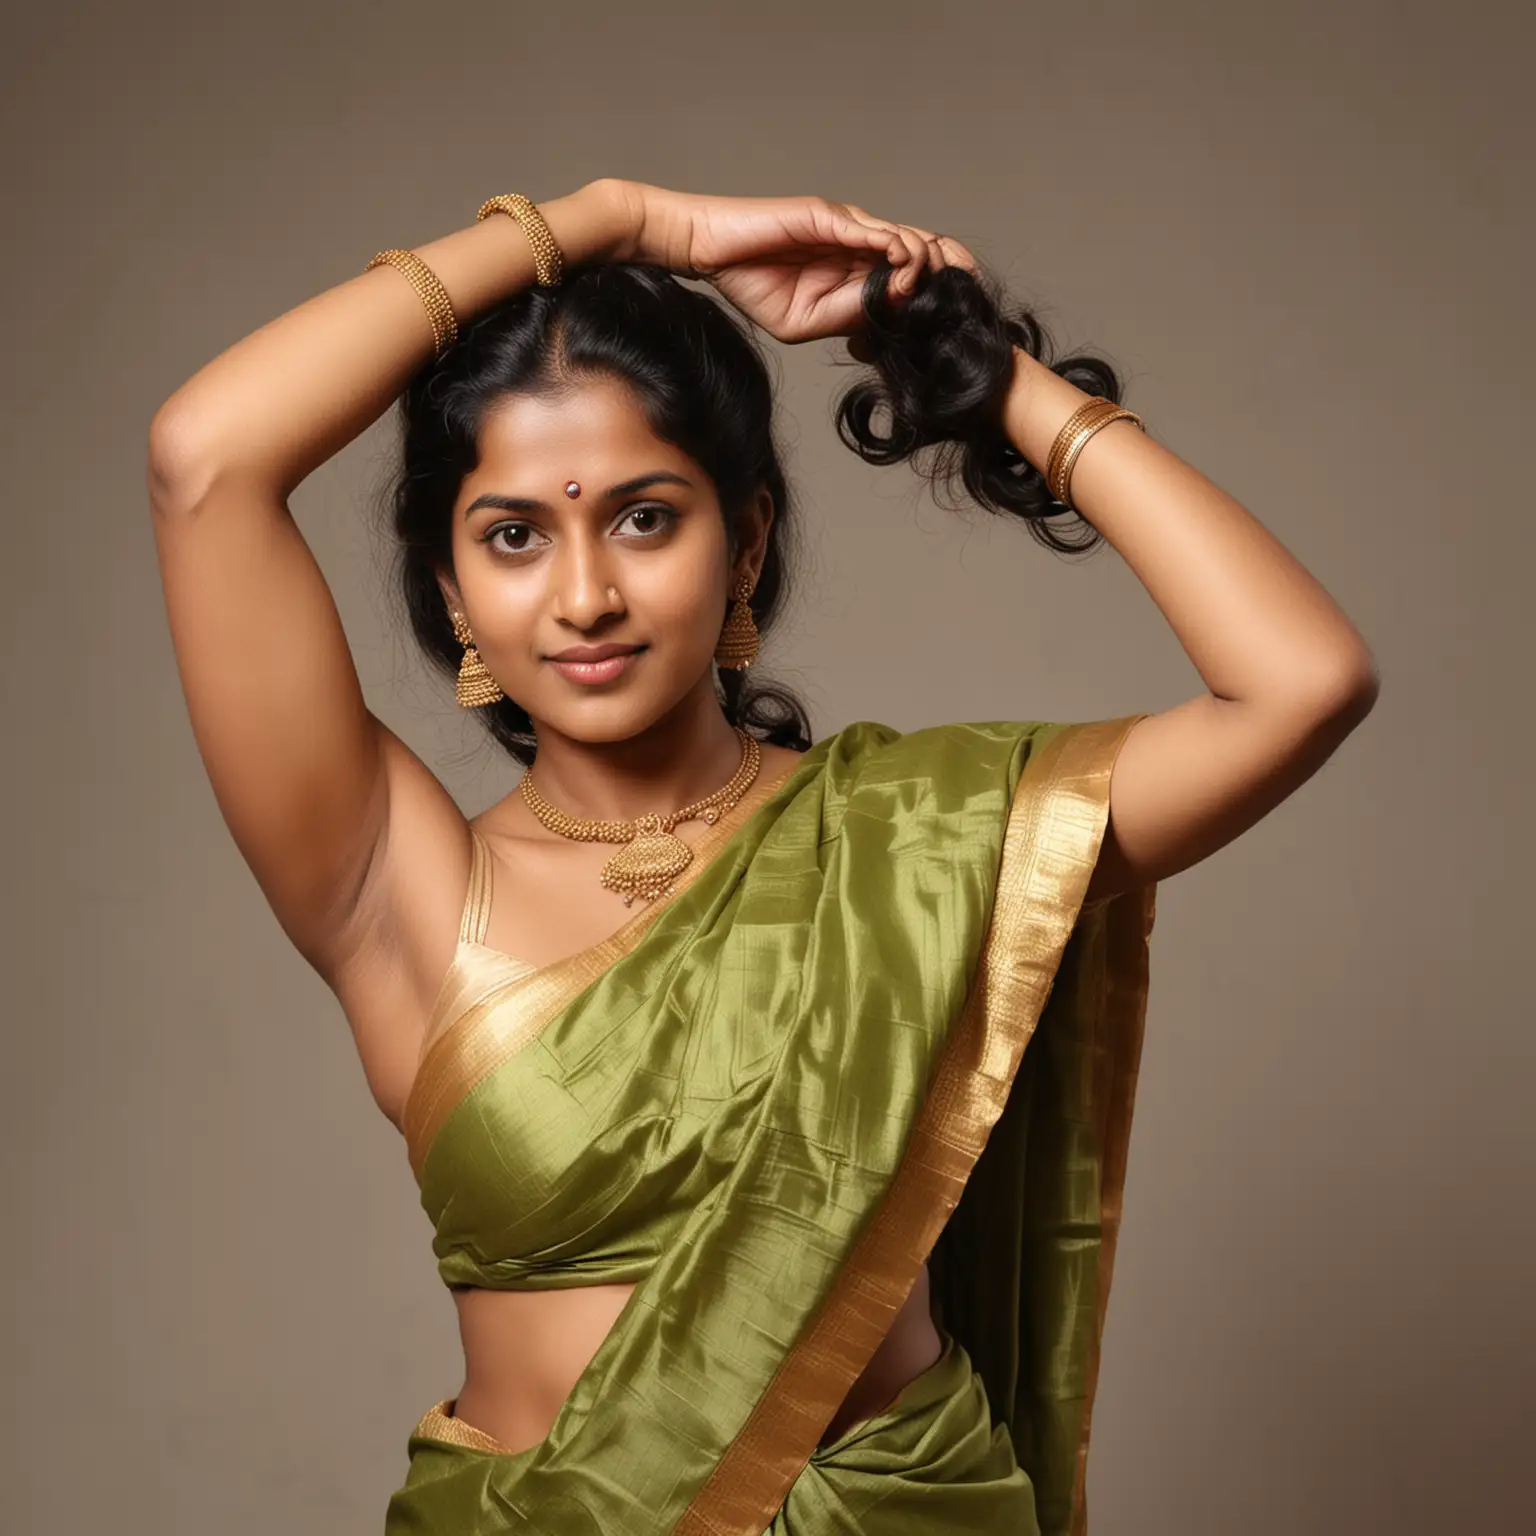 Traditional-South-Indian-Women-in-Kerala-Saree-with-Raised-Hands